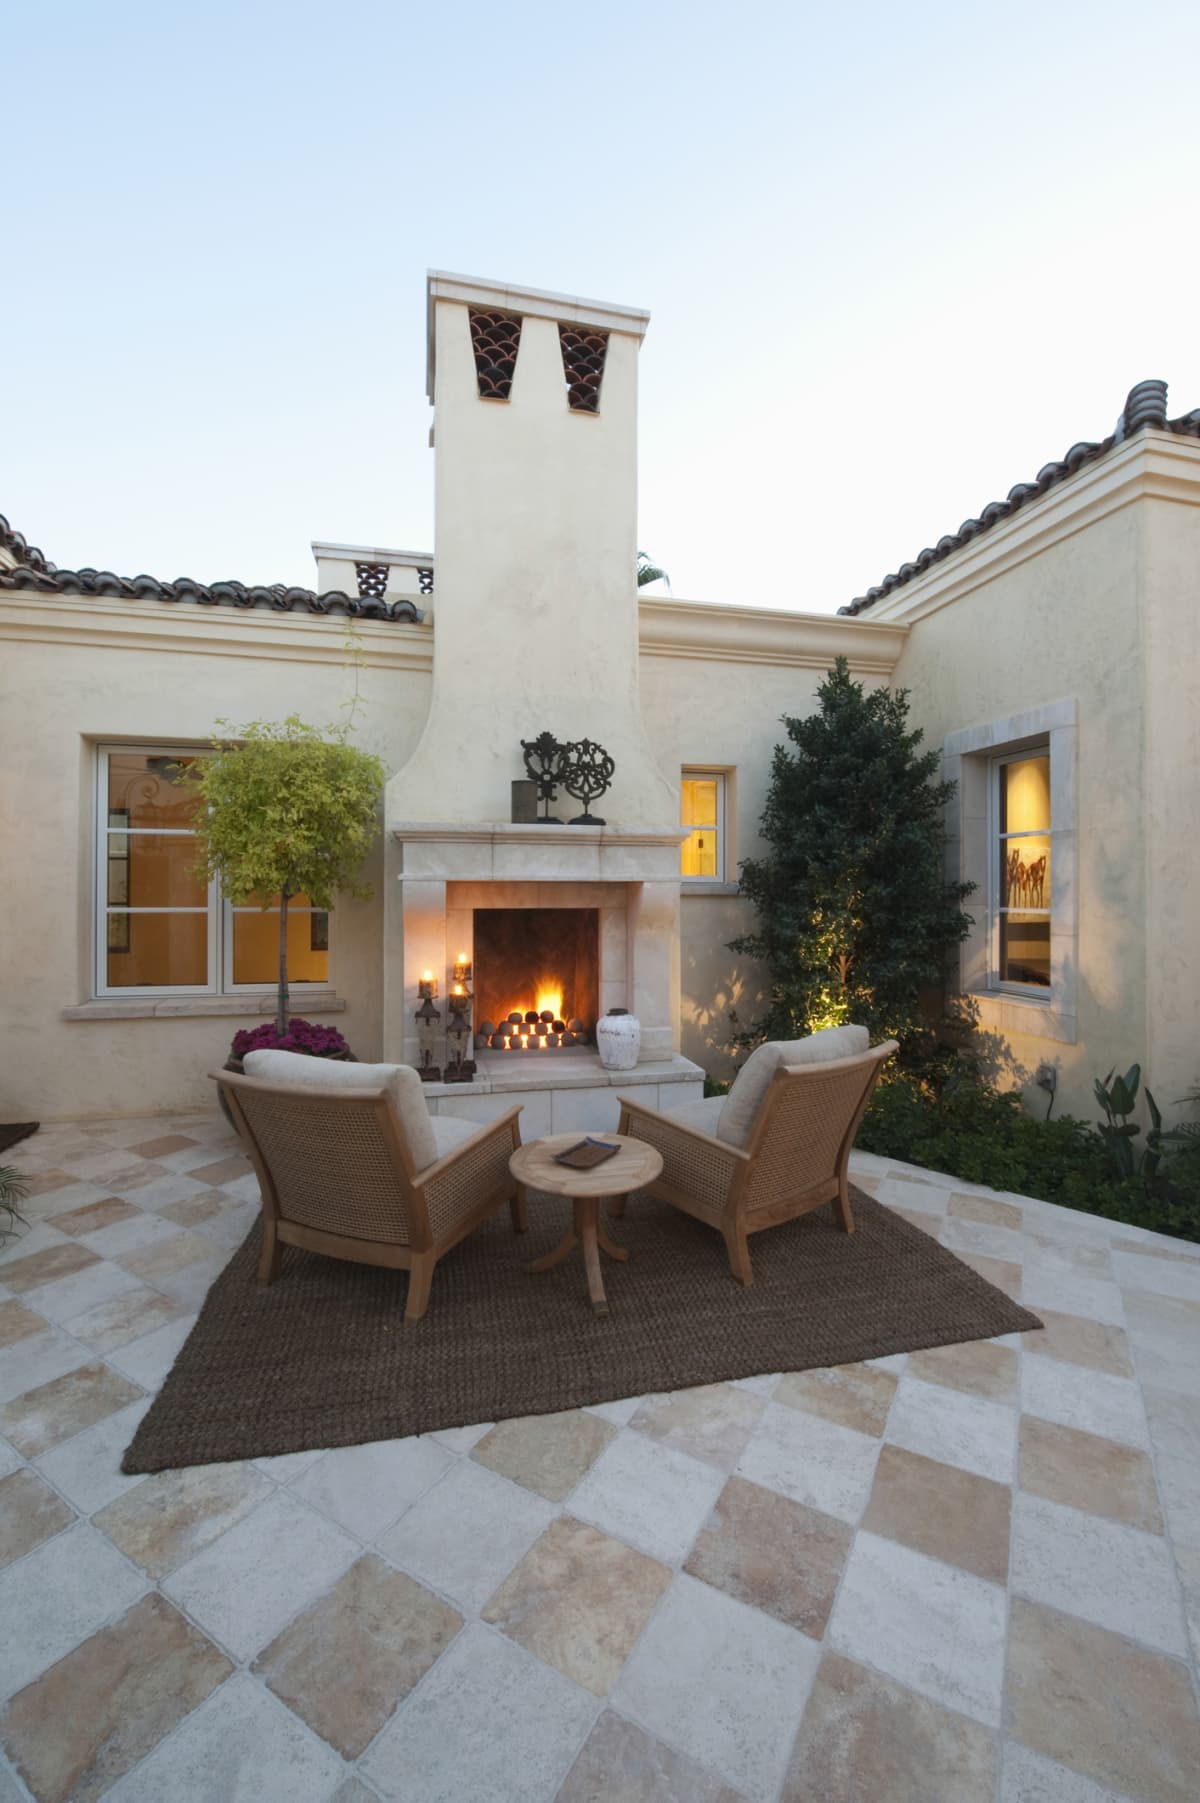 Outdoor room at dusk with fireplace and furniture